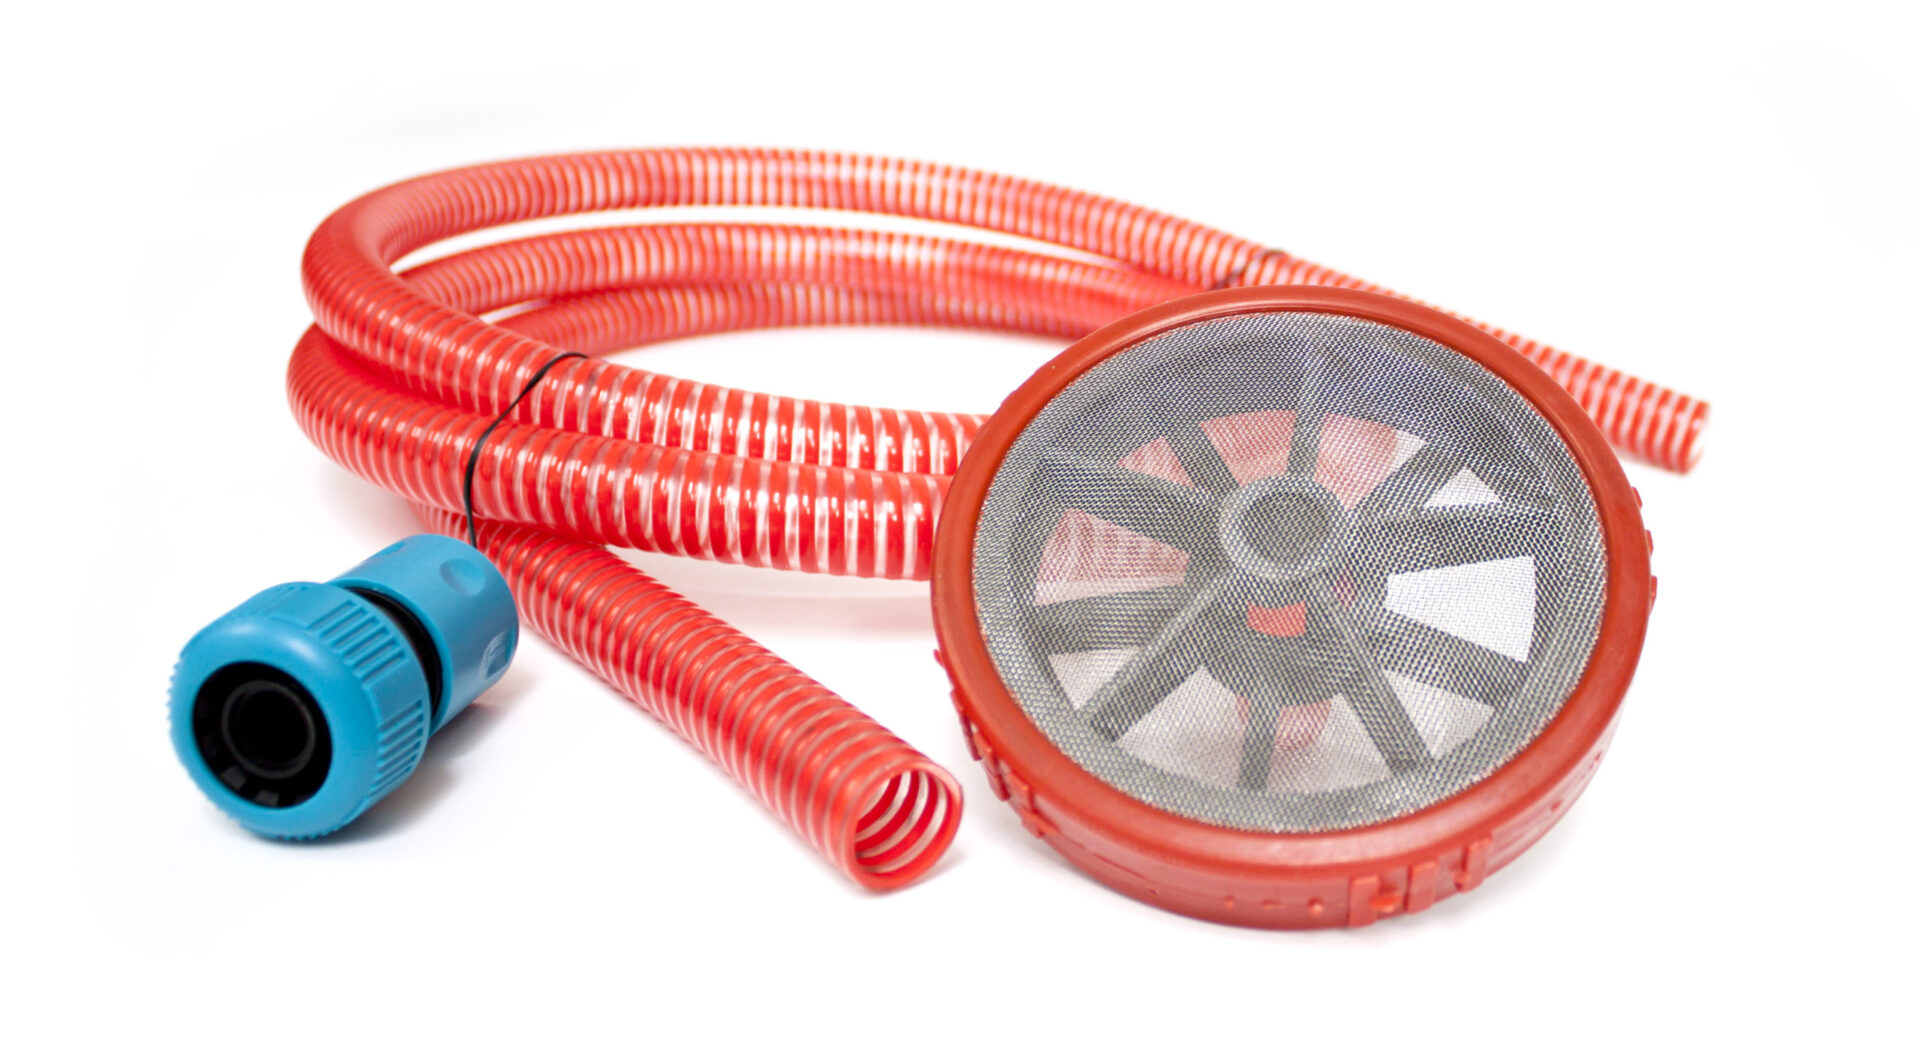 Next Day Delivery PVC Suction & Delivery Hose Many Sizes Available From Stock 